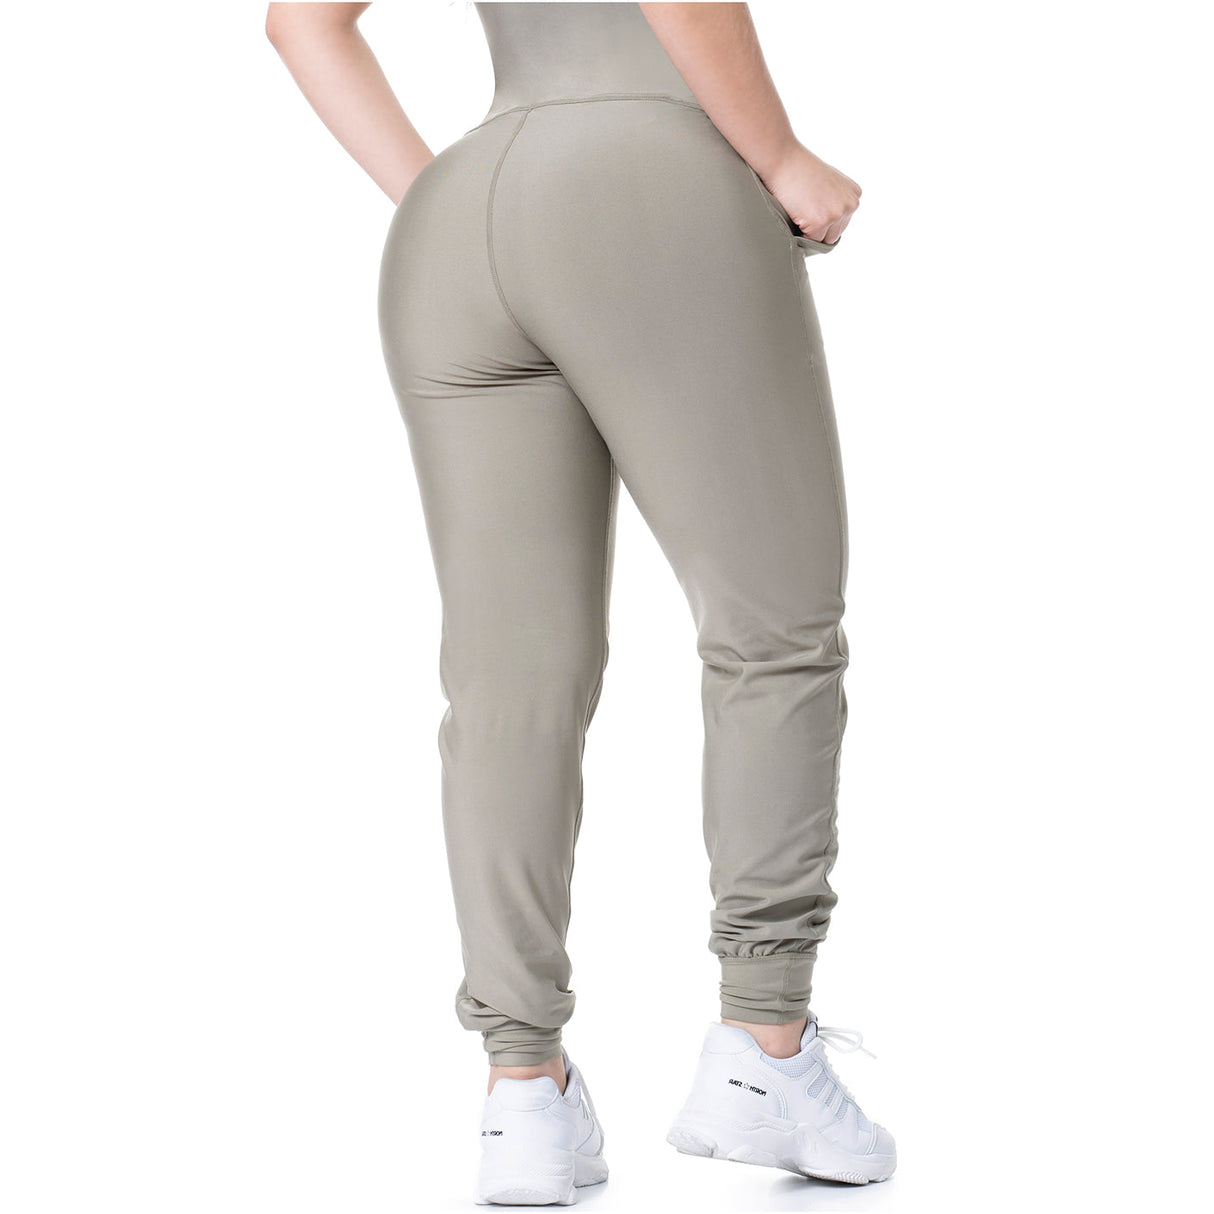 Shaping Women's Gym Leggings BUM BUM E-store  - Polish  manufacturer of sportswear for fitness, Crossfit, gym, running. Quick  delivery and easy return and exchange